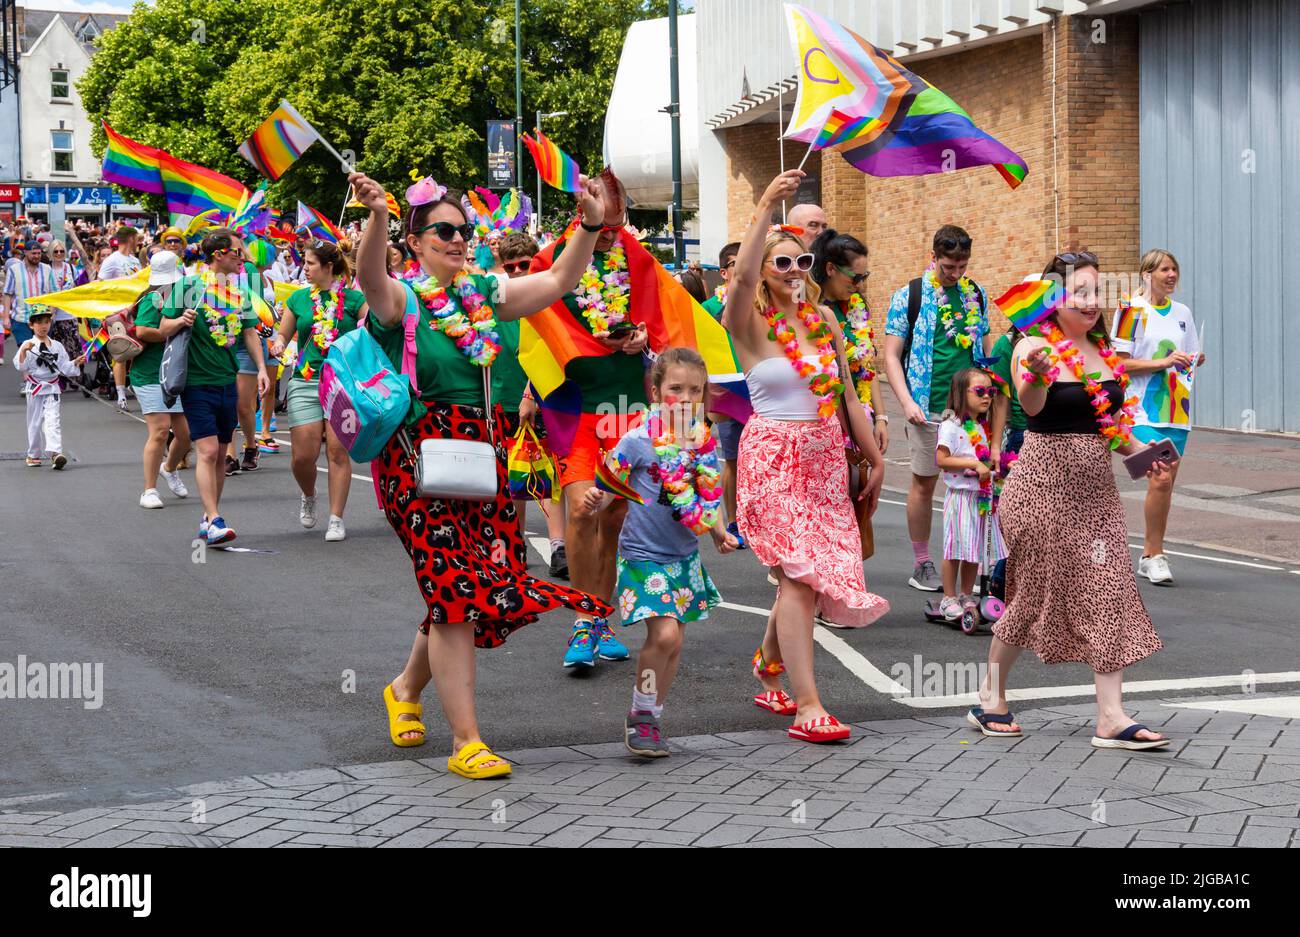 Bournemouth, Dorset, UK. 9th July, 2022. Bourne Free parade at Bournemouth - crowds turn out to watch Bournemouth's annual LGBT Pride Festival and celebration of diversity with approximately 800 people taking part. The theme this year is Pride Goes Green, as participants walk the route. Credit: Carolyn Jenkins/Alamy Live News Stock Photo